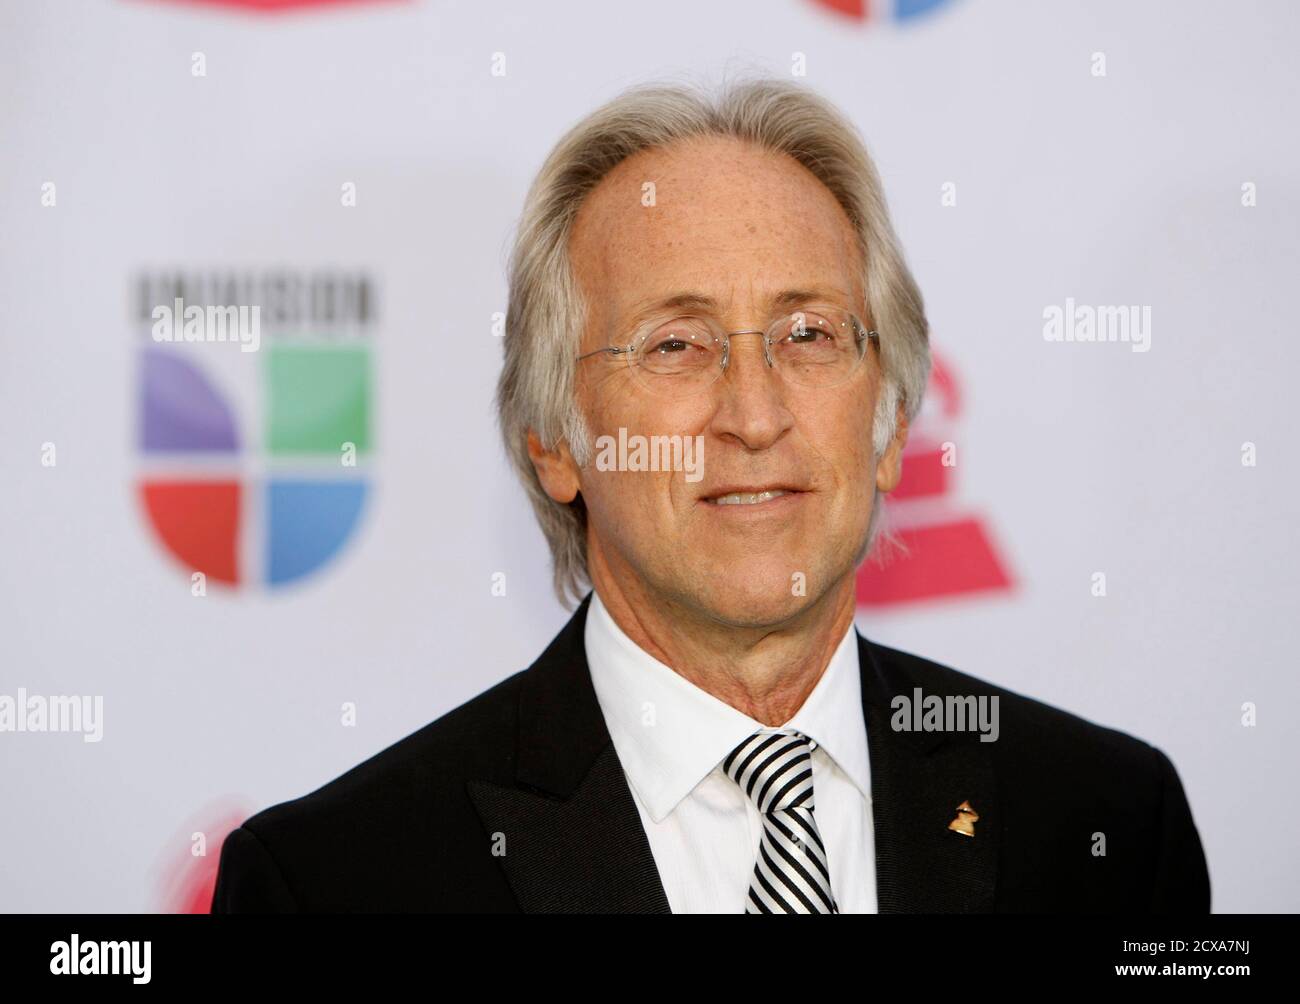 President of the National Academy of Recording Arts and Sciences, Neil Portnow, arrives at the 13th Latin Grammy Awards in Las Vegas, Nevada, November 15, 2012.   REUTERS/Steve Marcus (UNITED STATES  - Tags: ENTERTAINMENT) Stock Photo